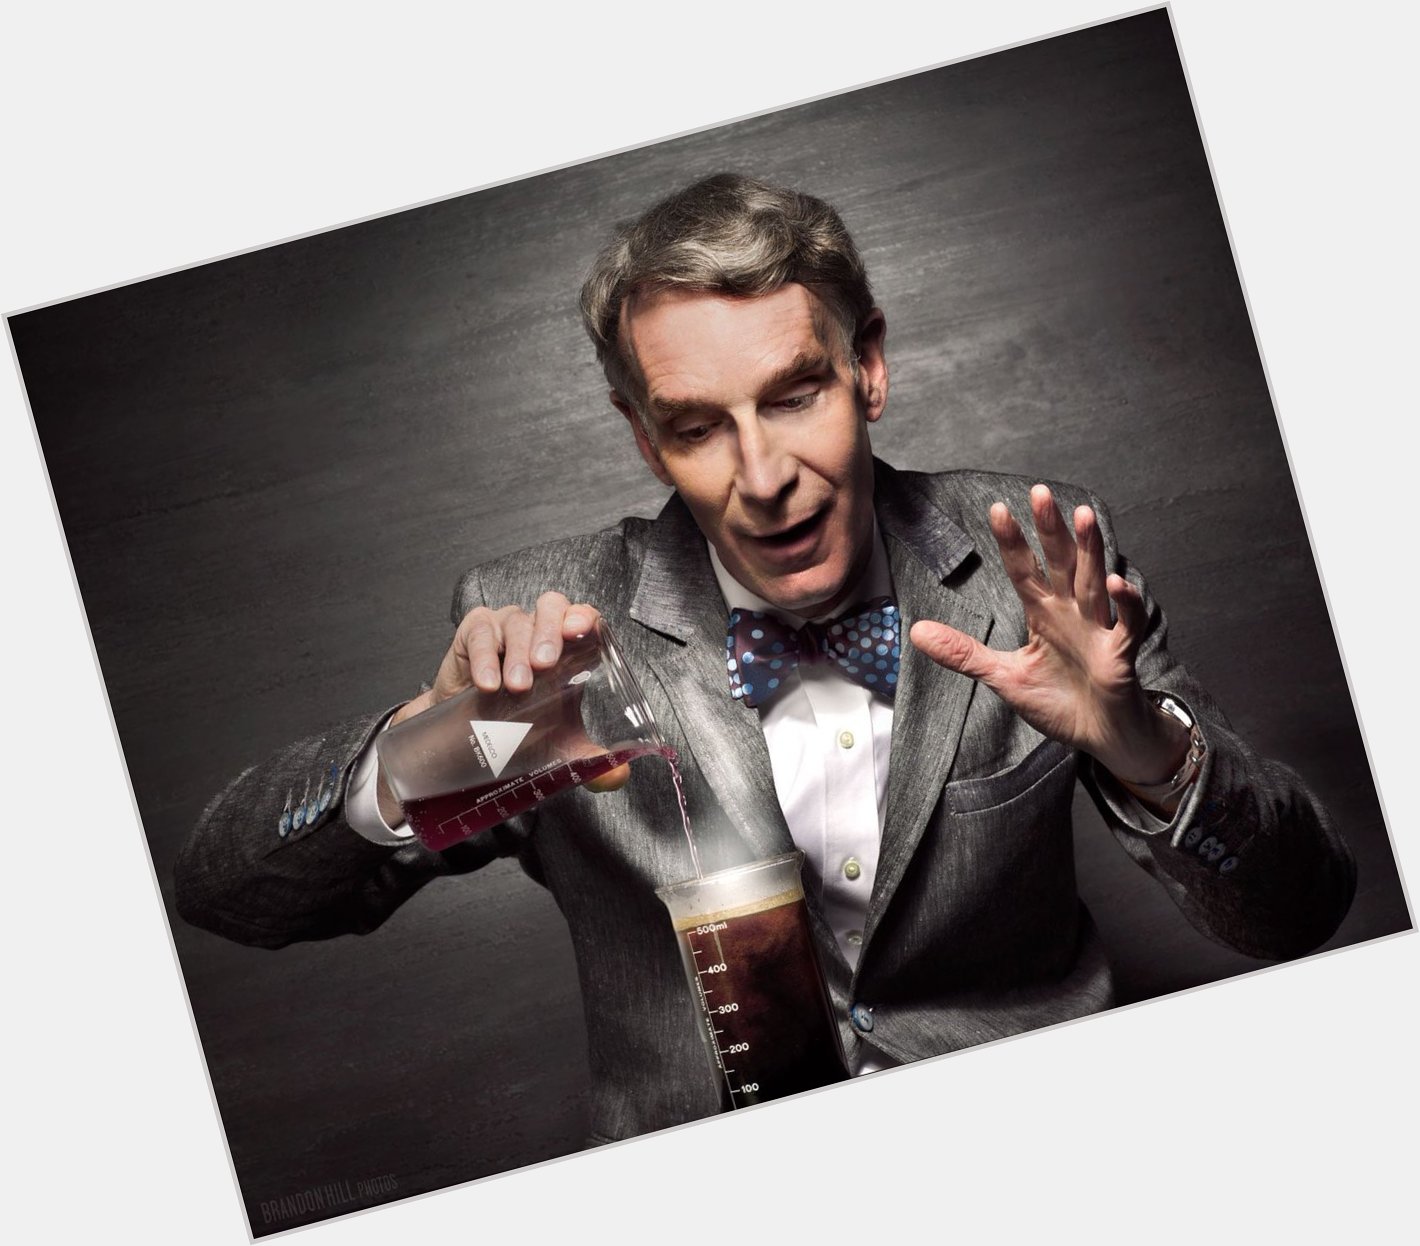 Happy Birthday to Bill Nye \The Science Guy\ who turns 62 today! 